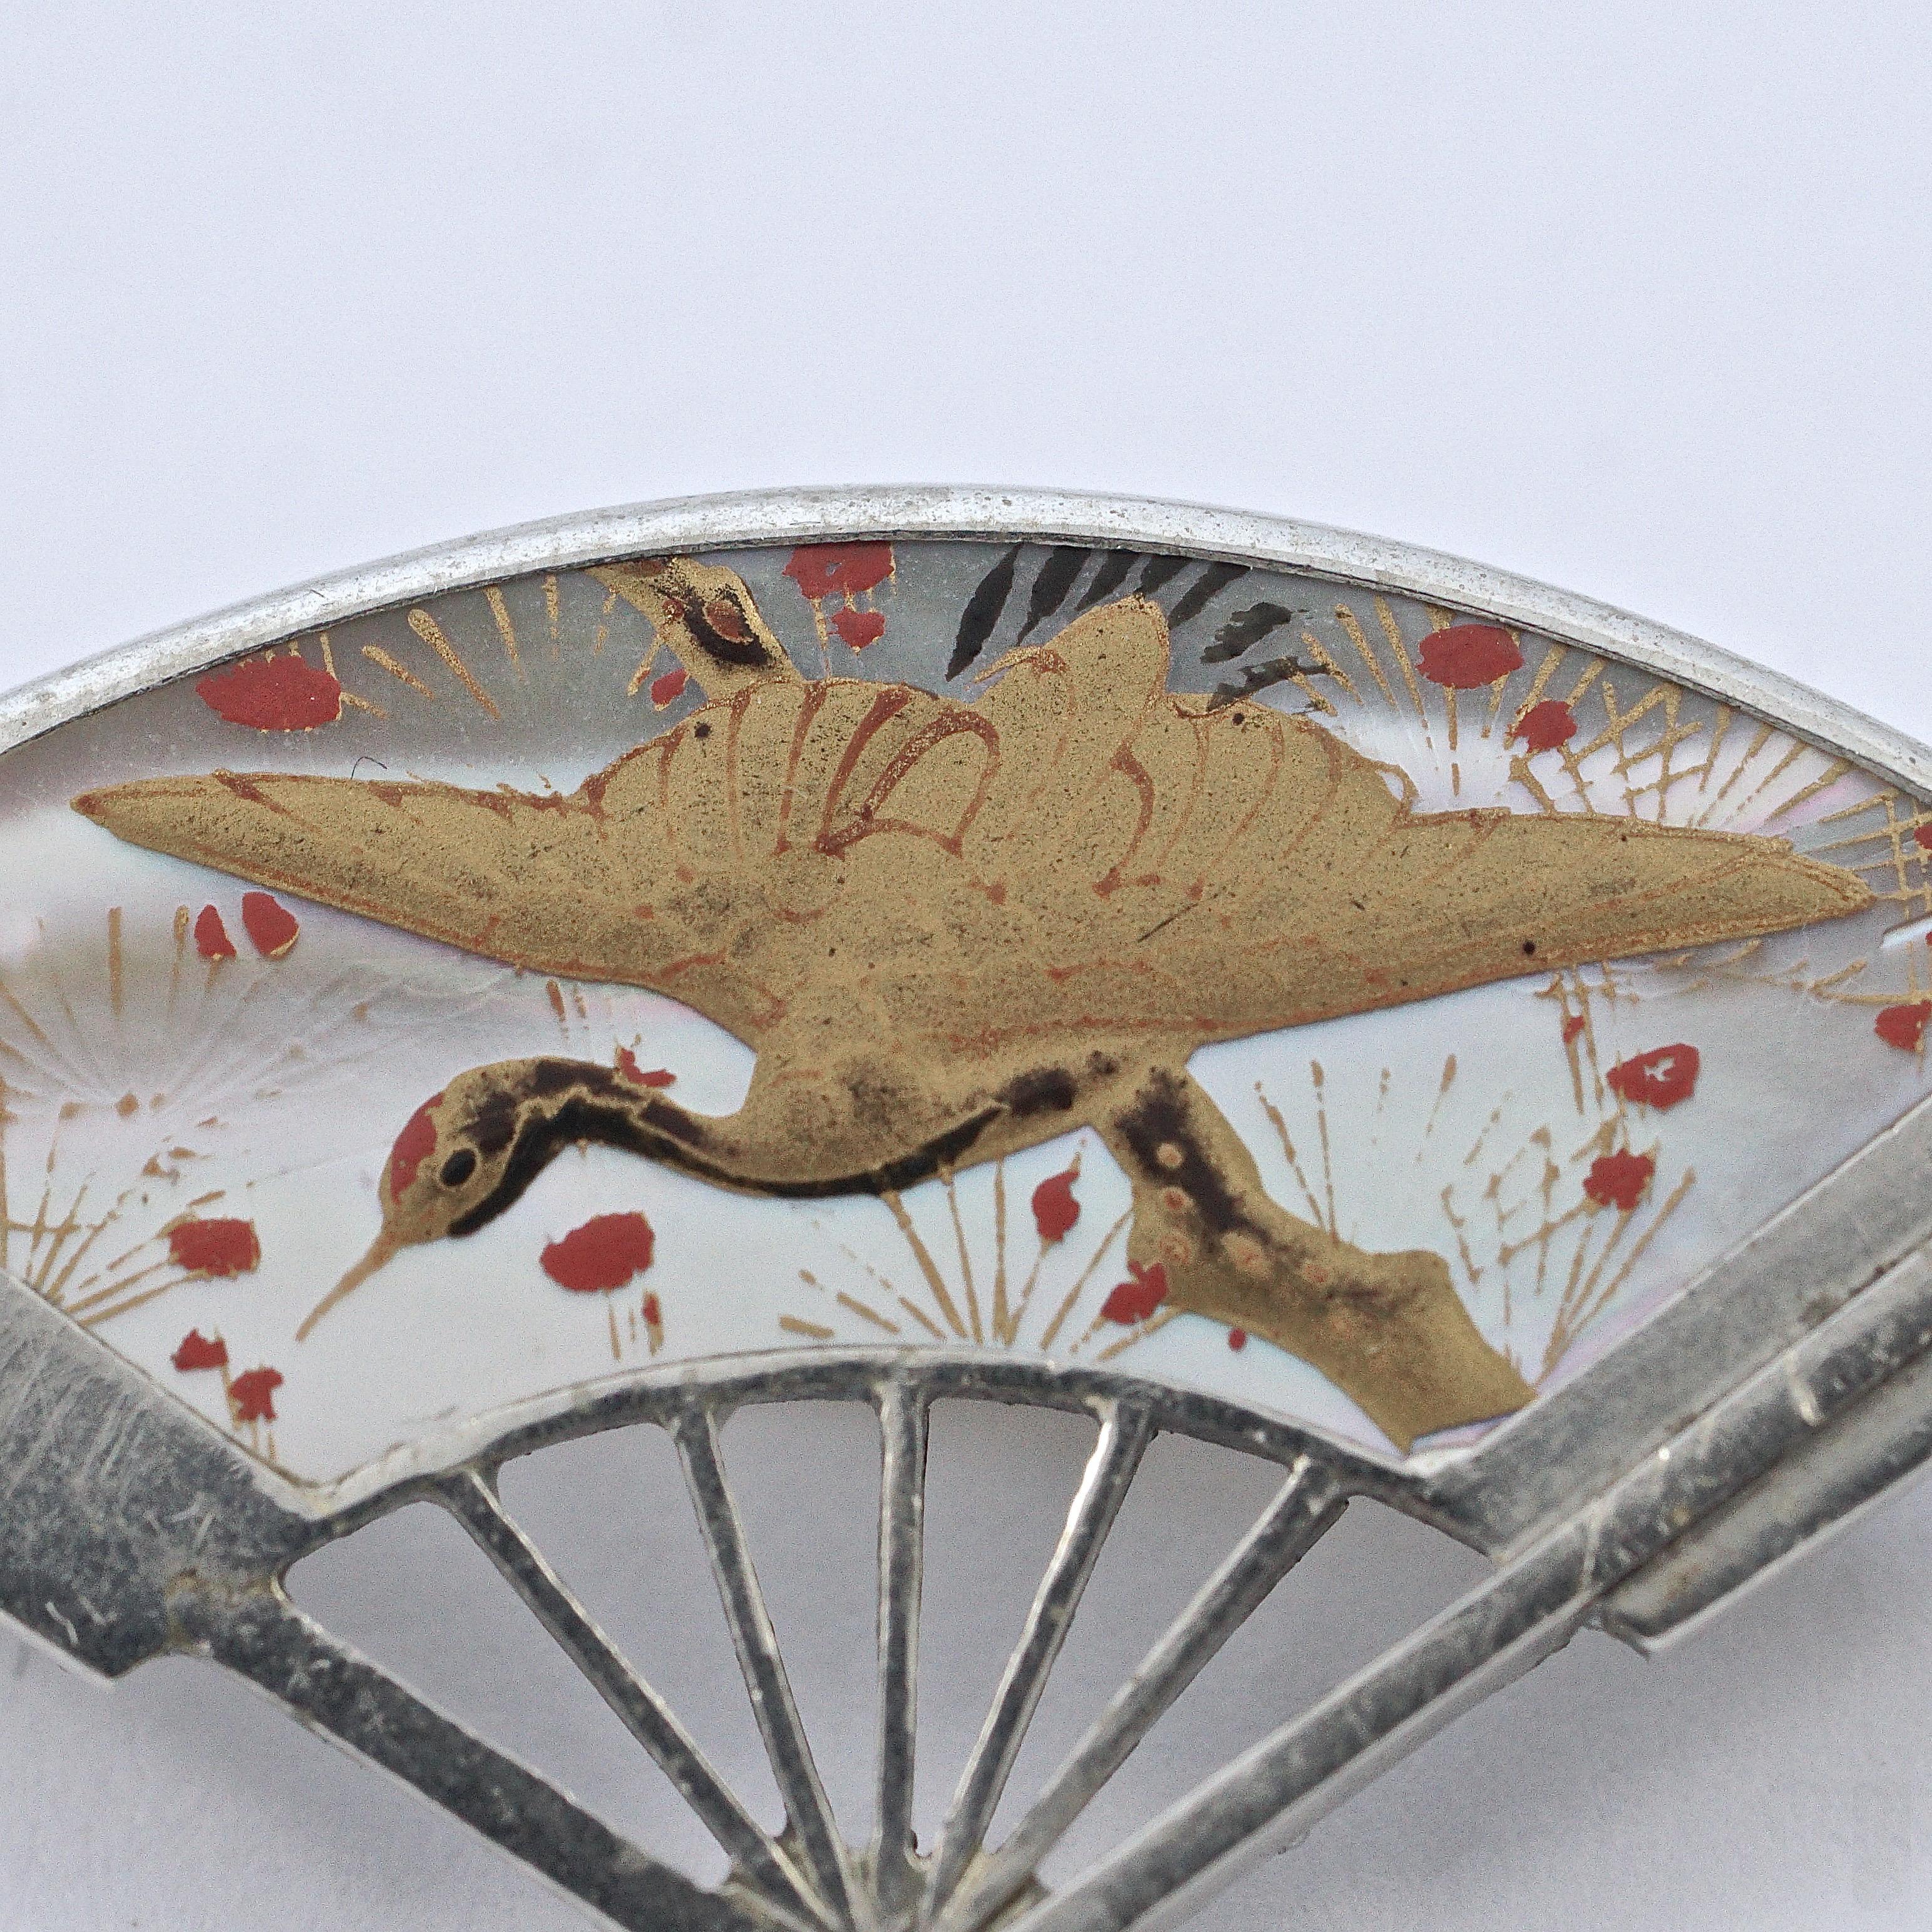 
Antique Japanese silver plated fan brooch featuring an exquisite hand painted red and gold crane and flowers design on mother of pearl. Measuring length 3.6cm / 1.4 inches by width 2.25cm / .88 inch. There is a stamp to the reverse. The pin has